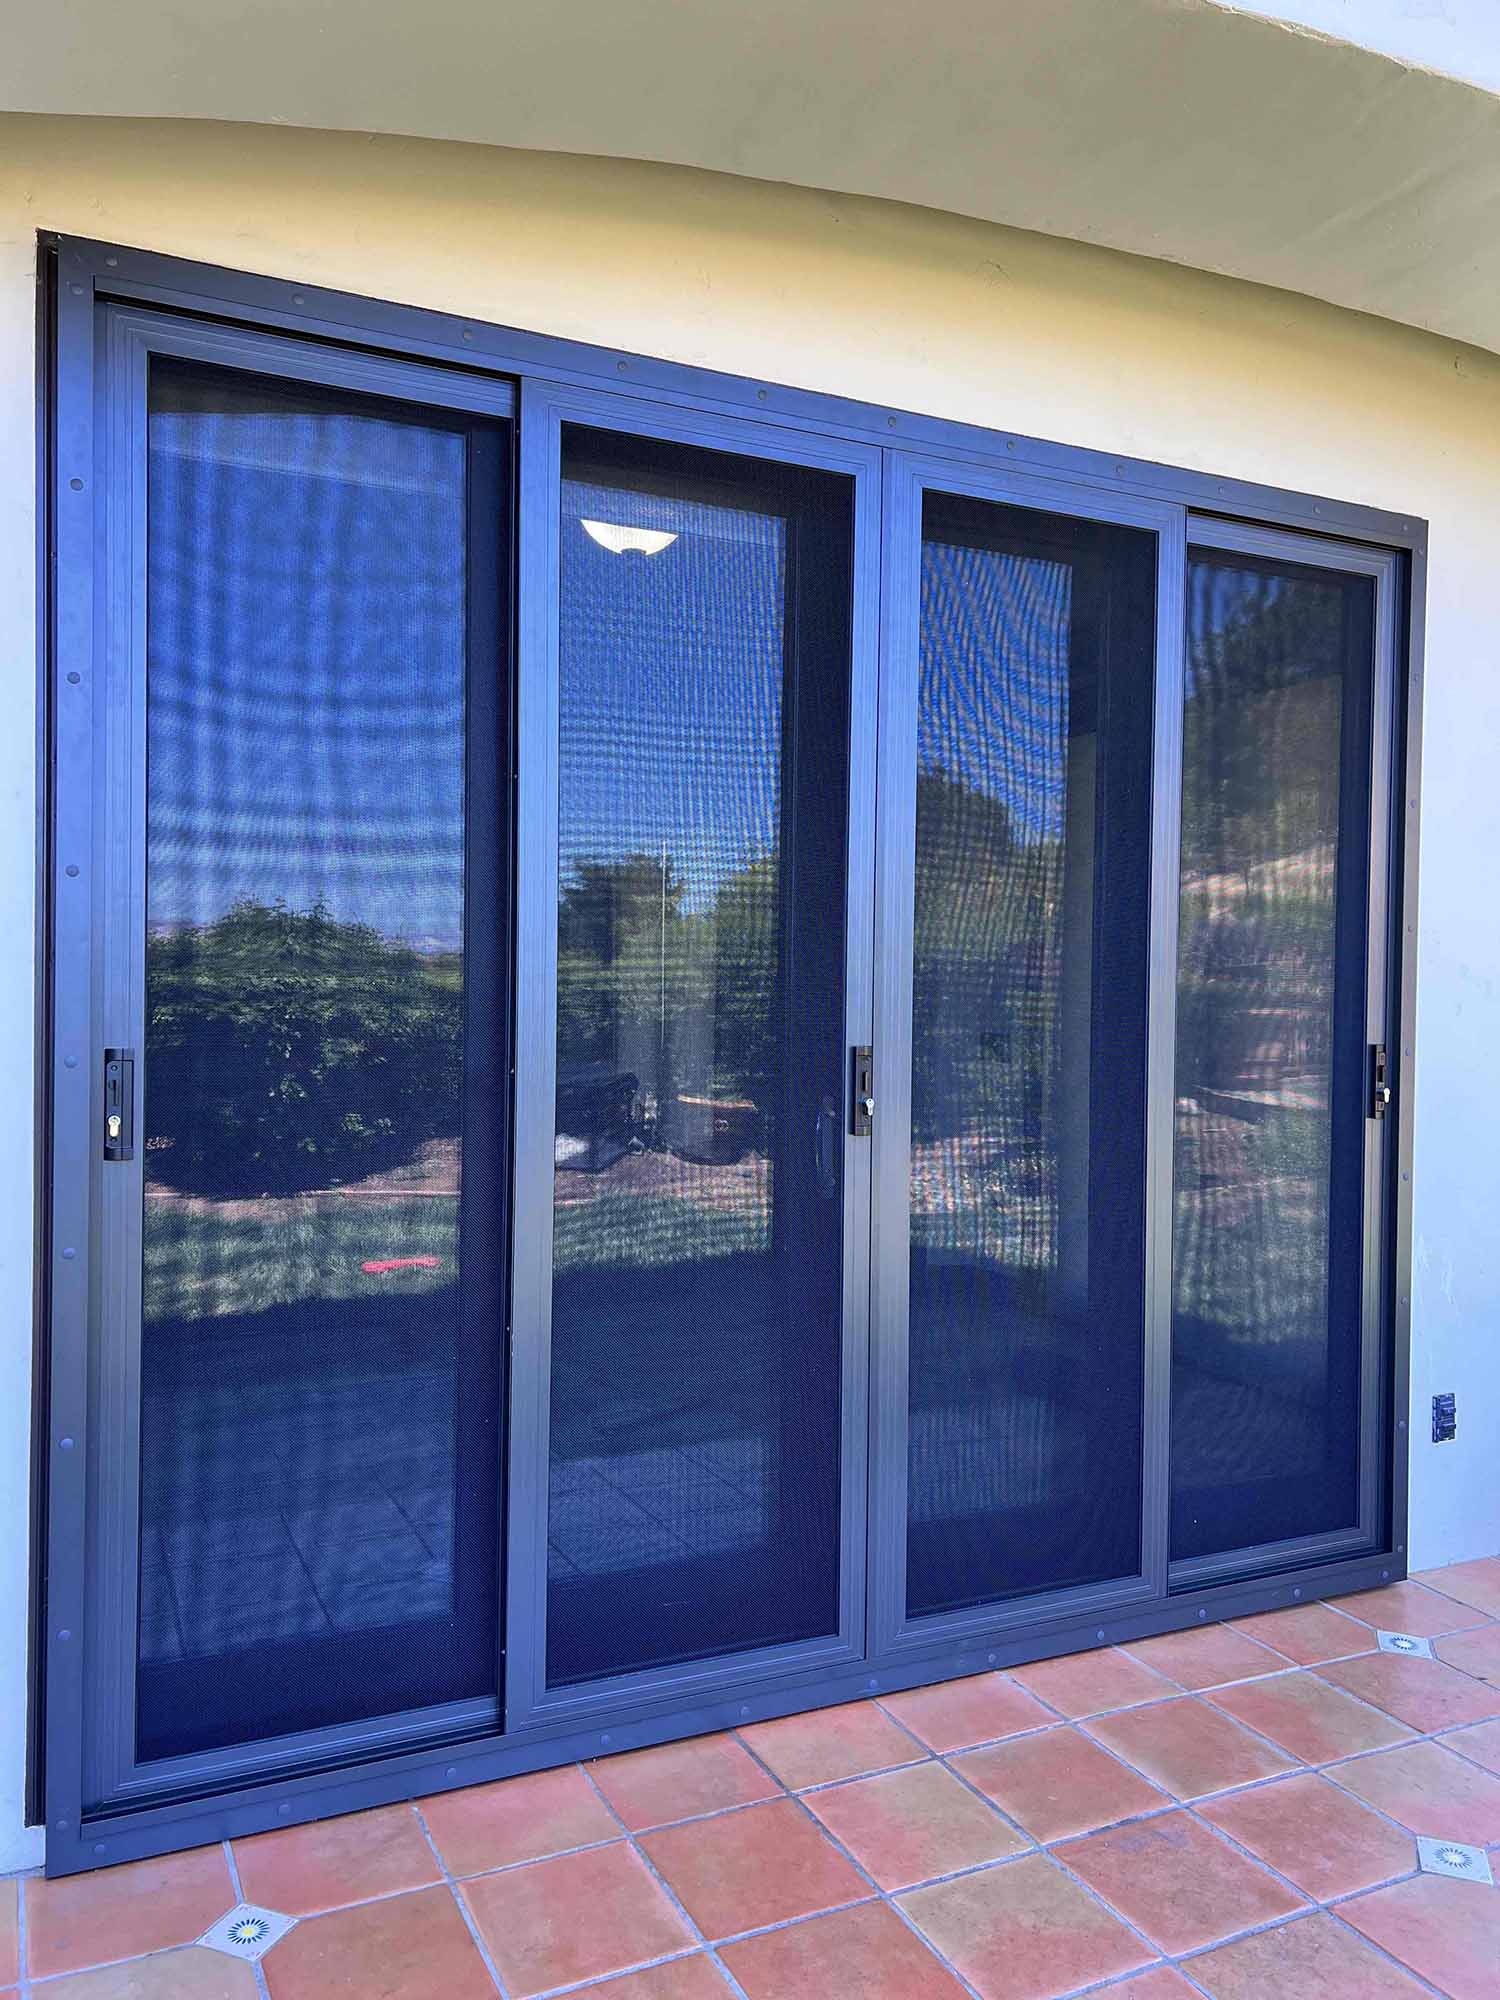 A San Jose Home Gets Crimsafe Security Screens. Installed by ClimatePro.